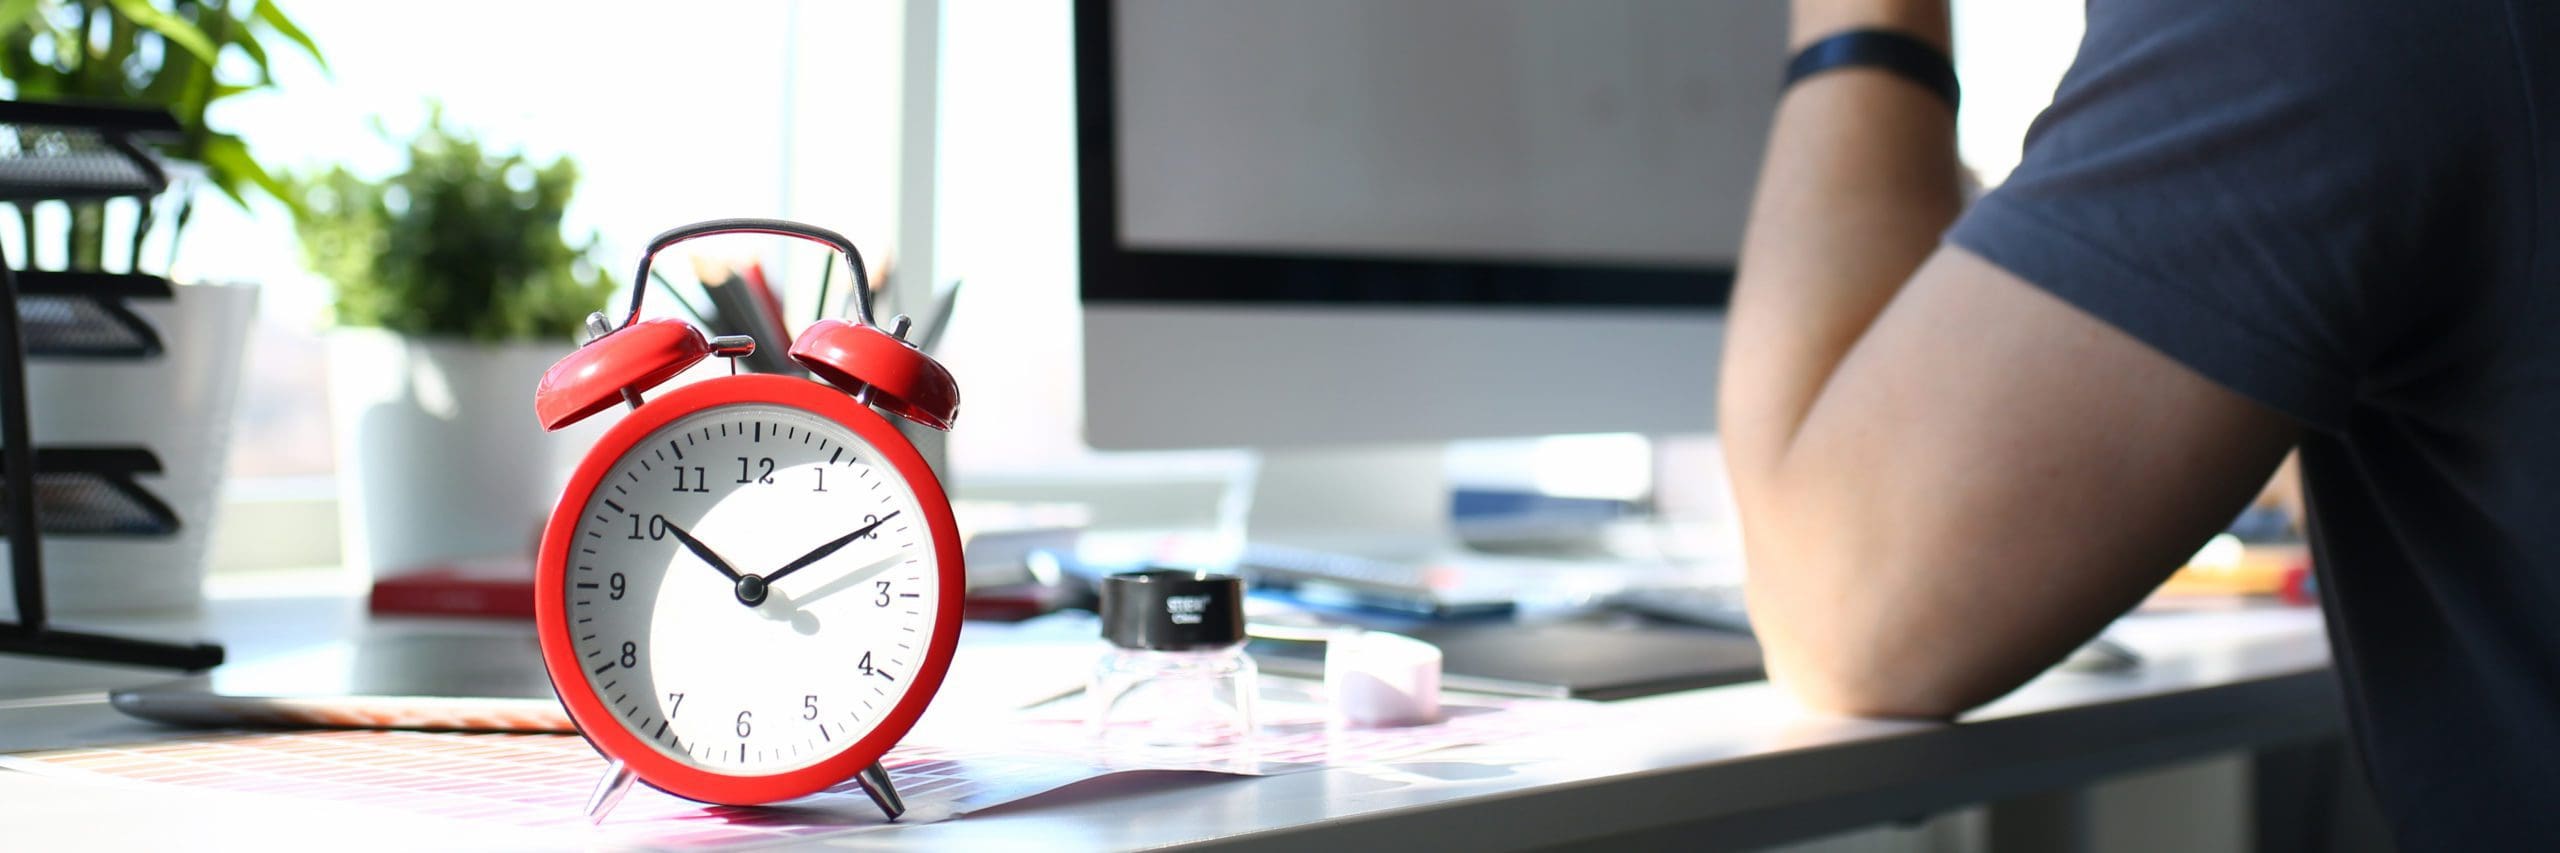 choosing a time management tool